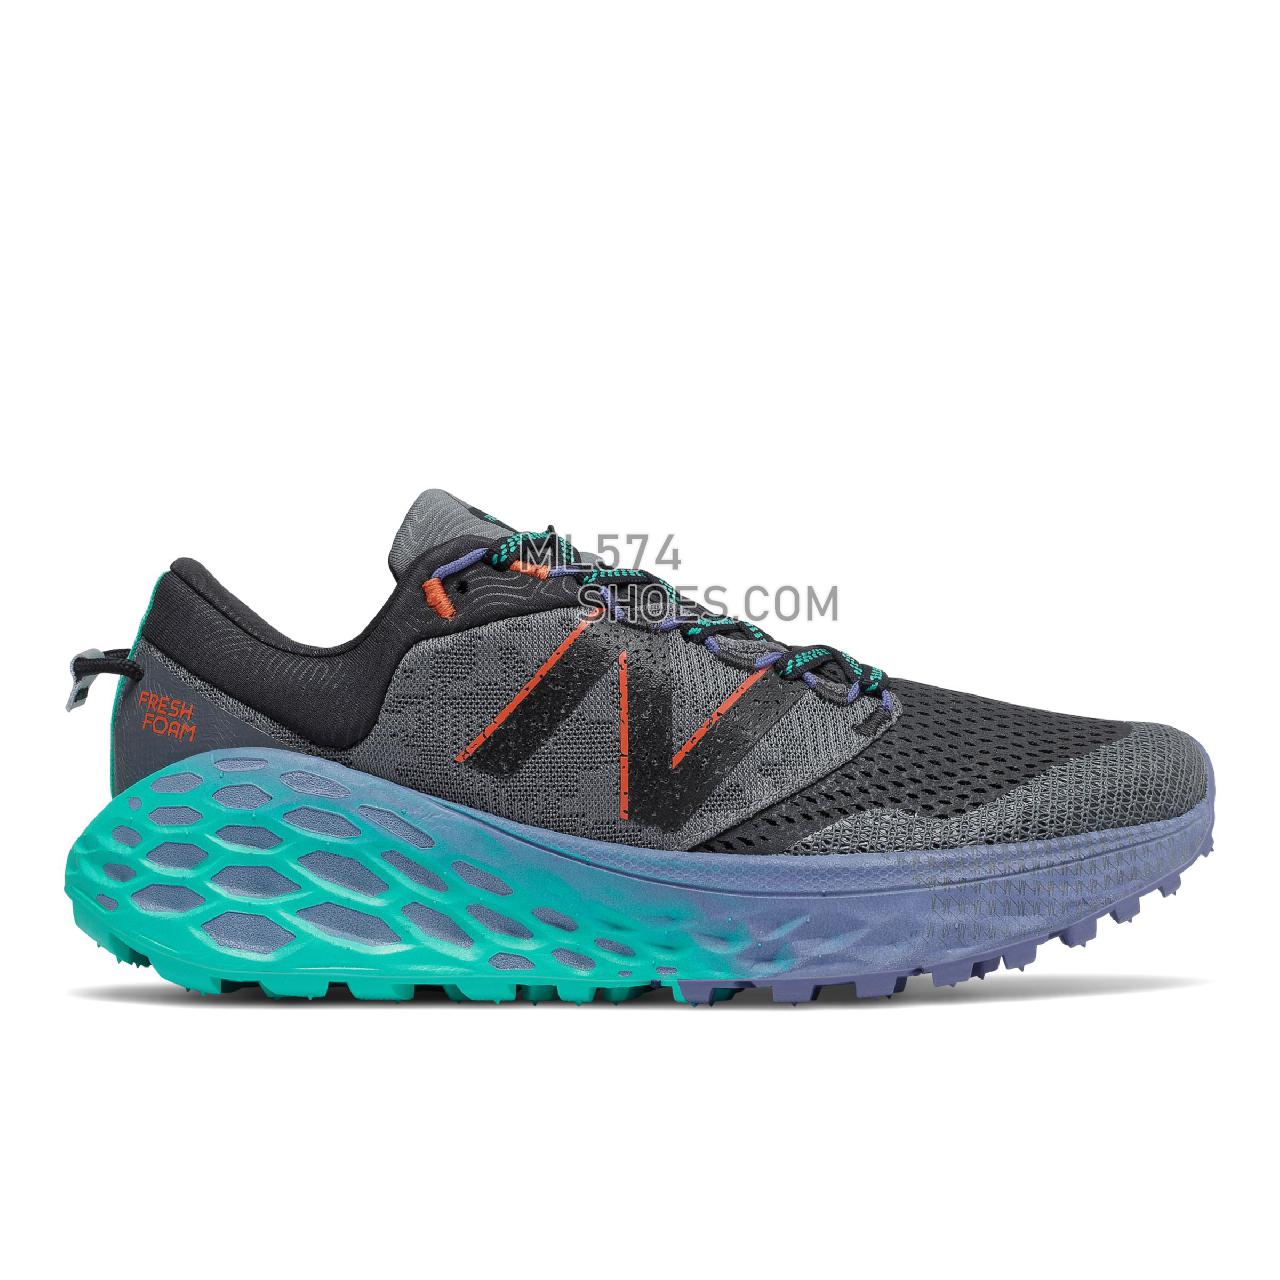 New Balance Fresh Foam More Trail v1 - Women's Trail Running - Lead with Magnetic Blue - WTMORGG